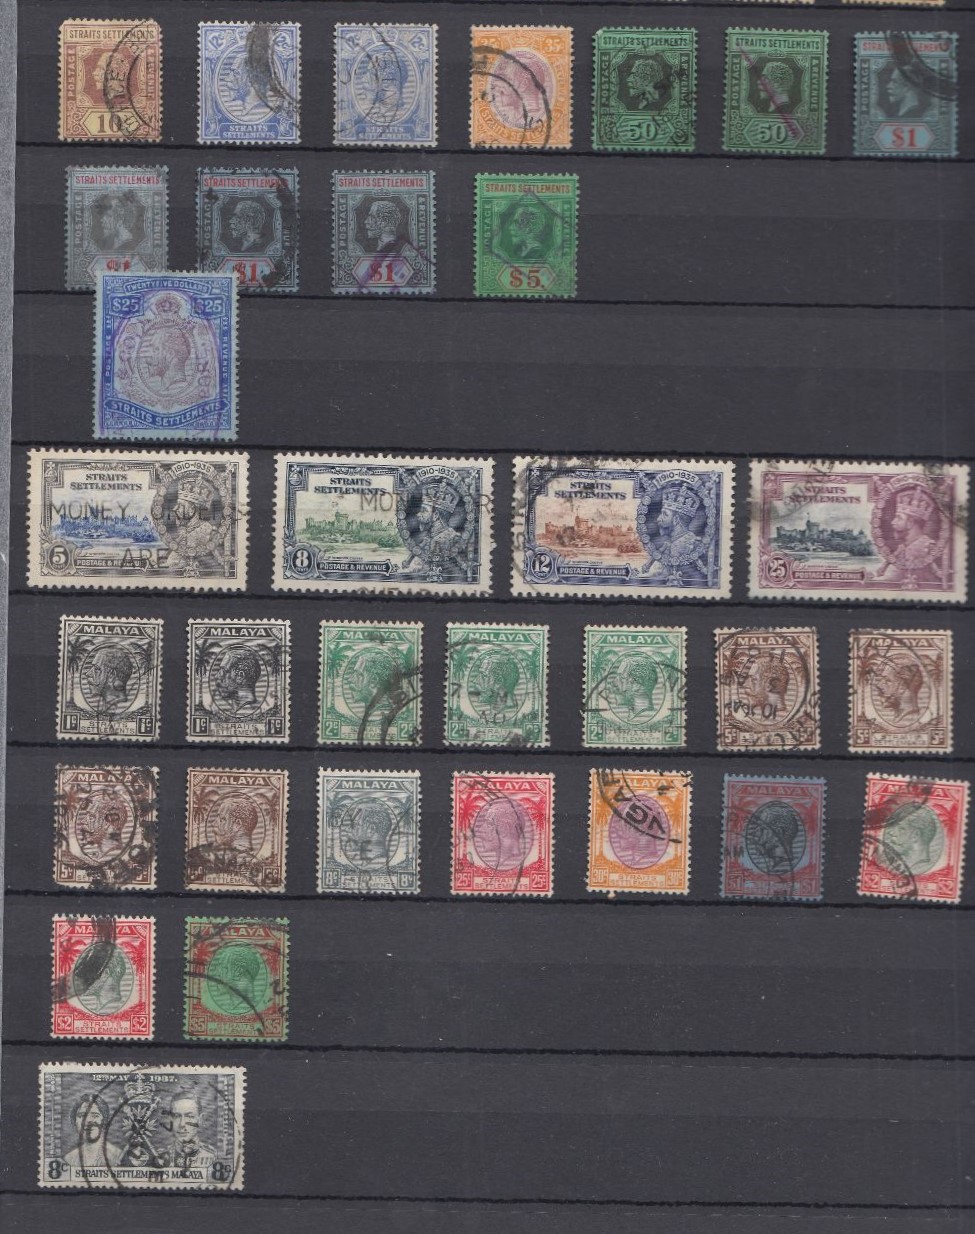 STAMPS BRITISH COMMONWEALTH mint and used in burgandy stockbook, Malaya, India all pre QEII. - Image 3 of 6